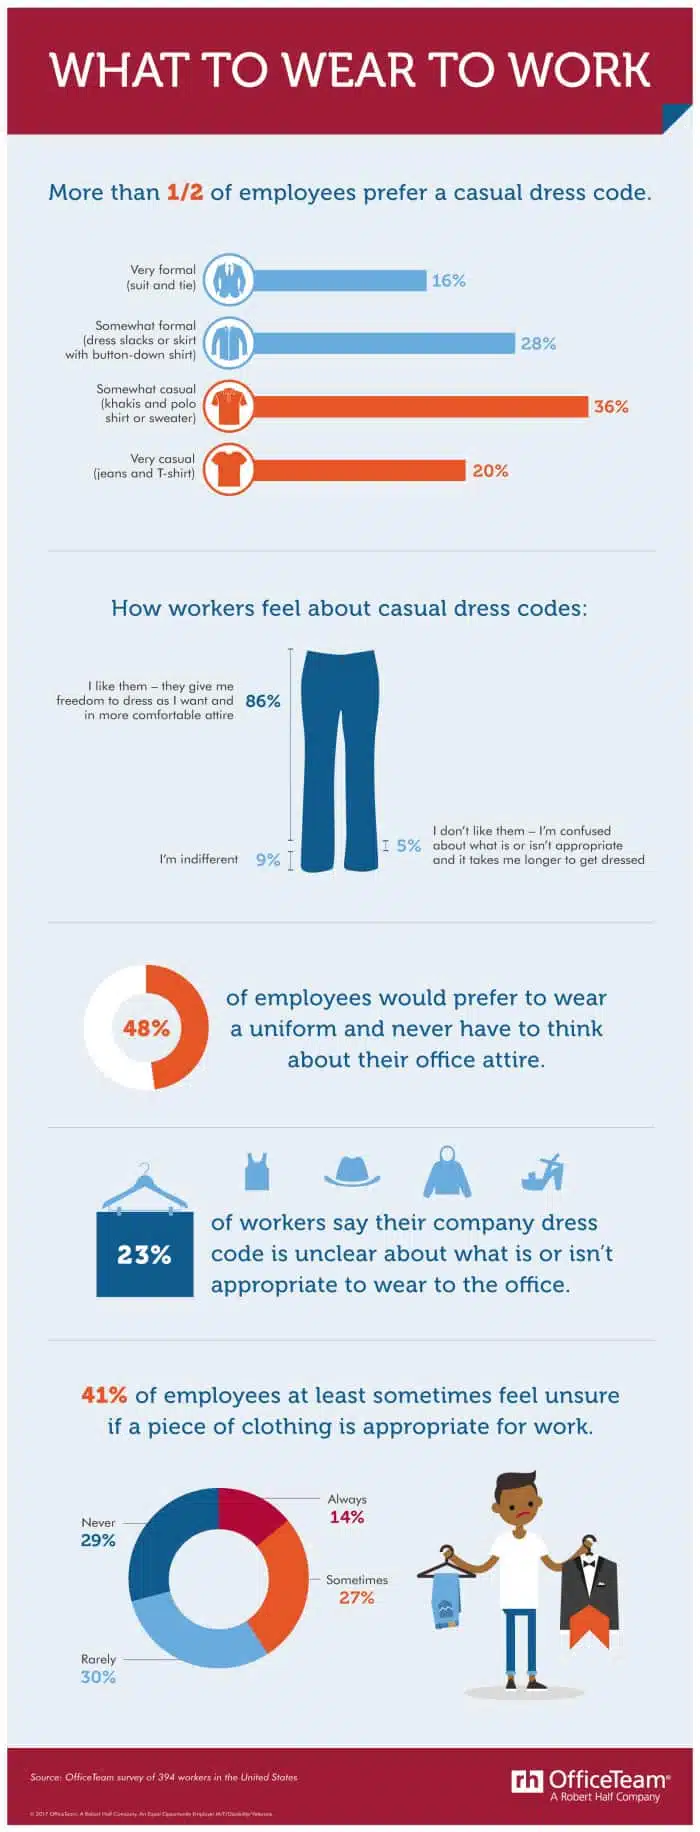 OfficeTeam 2017 Dress Codes Infographic